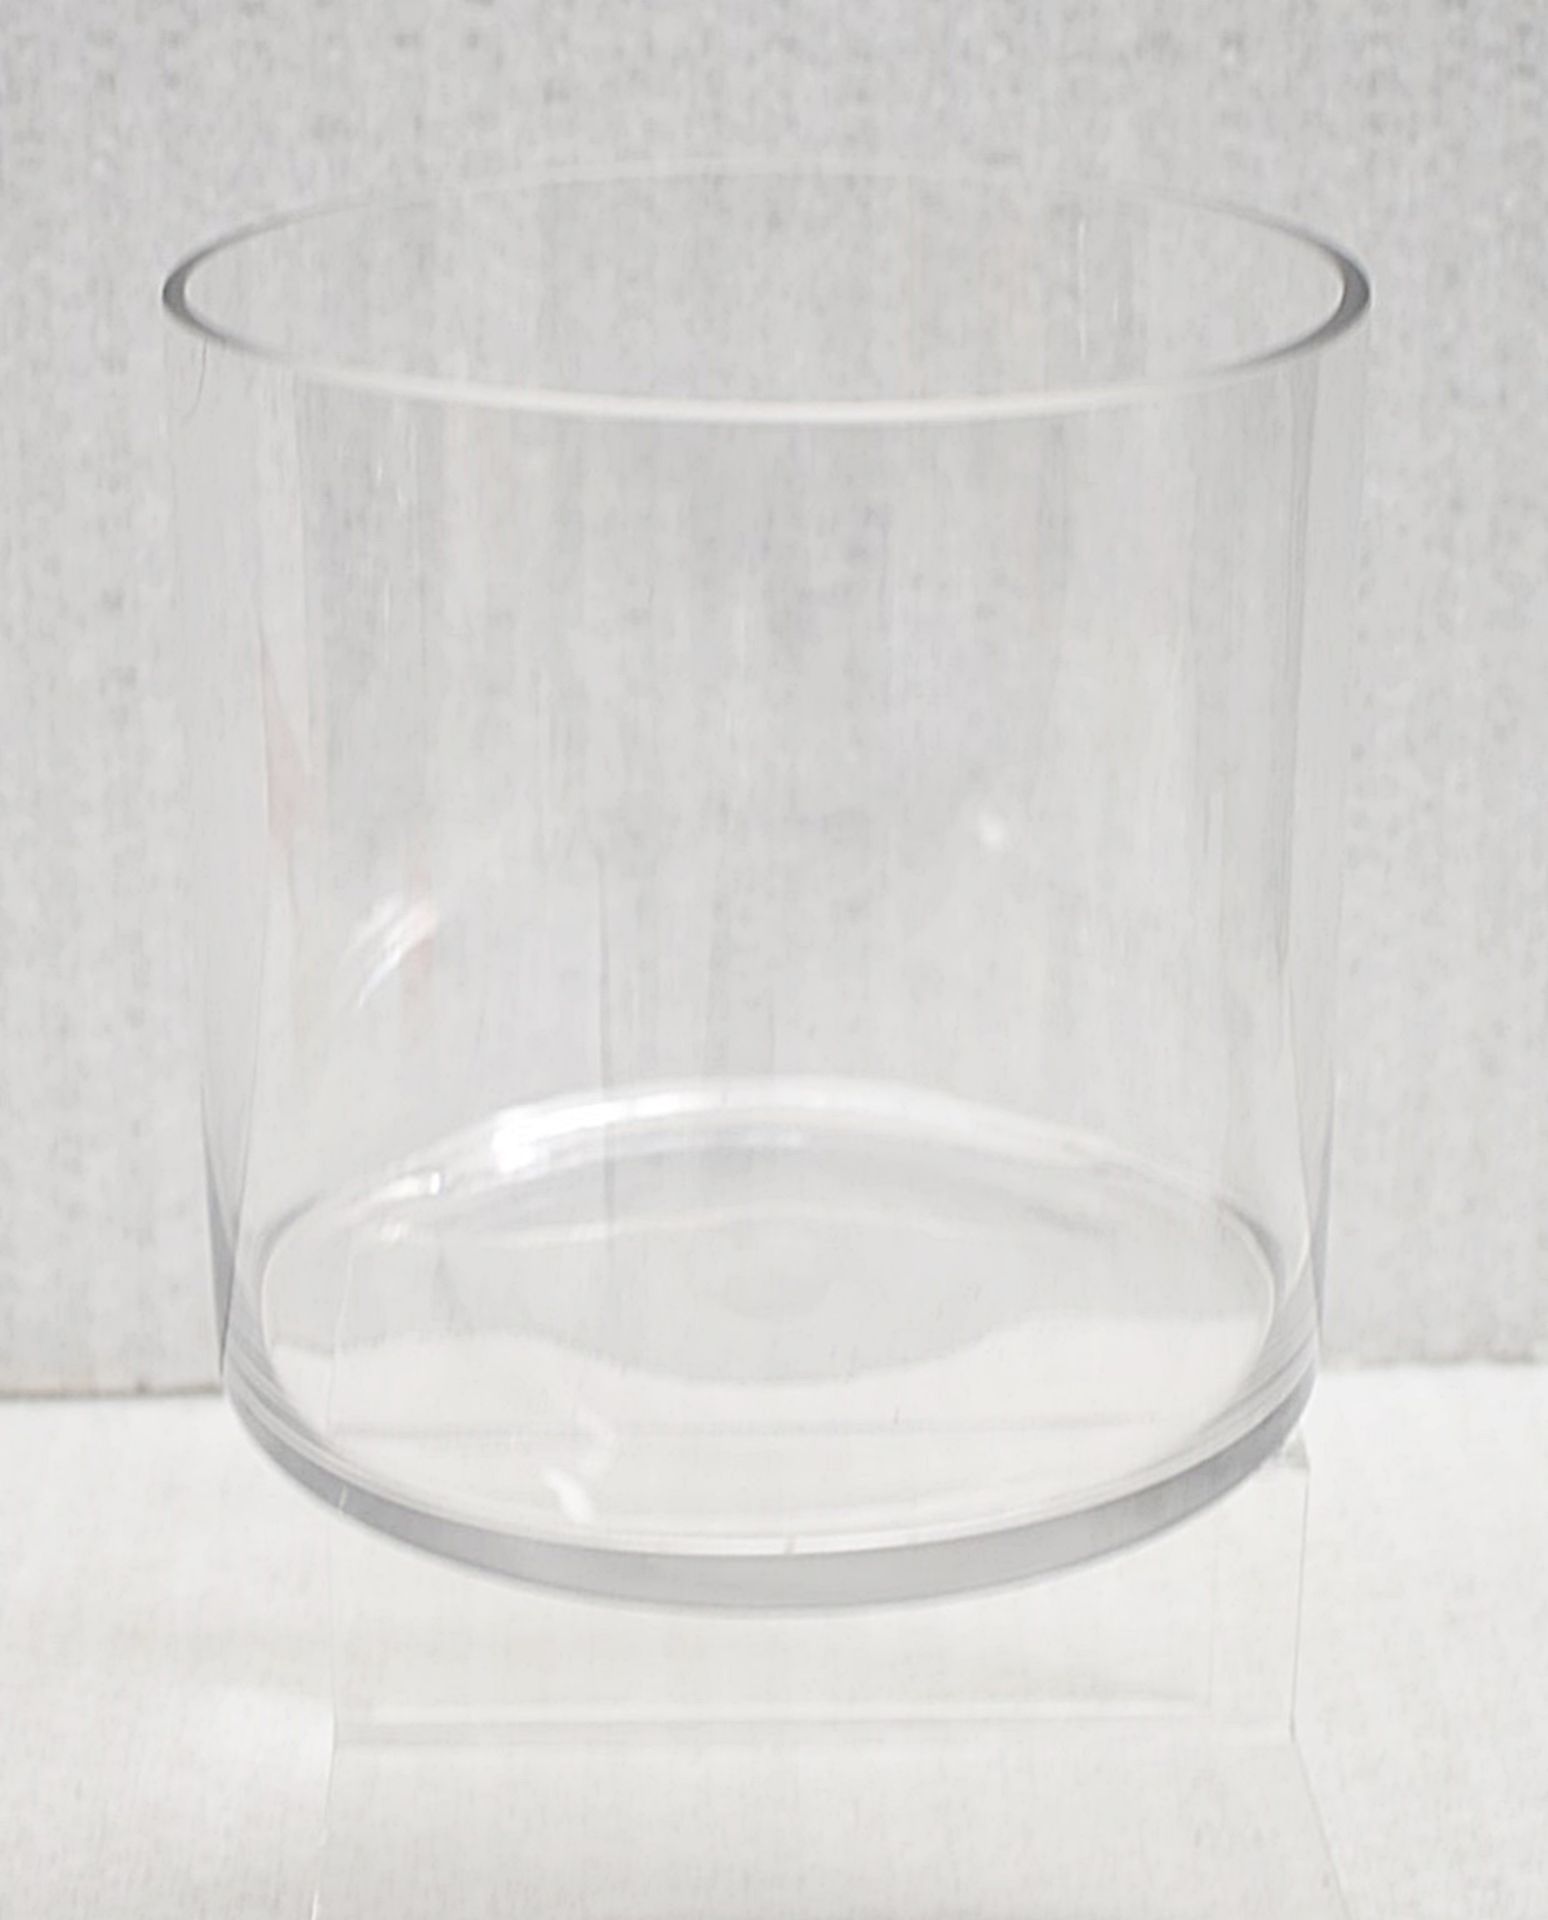 1 x Large Clear Glass Tubular Vase - Ref: CNT782/WH2/C24 - CL845 - NO VAT ON THE HAMMER -